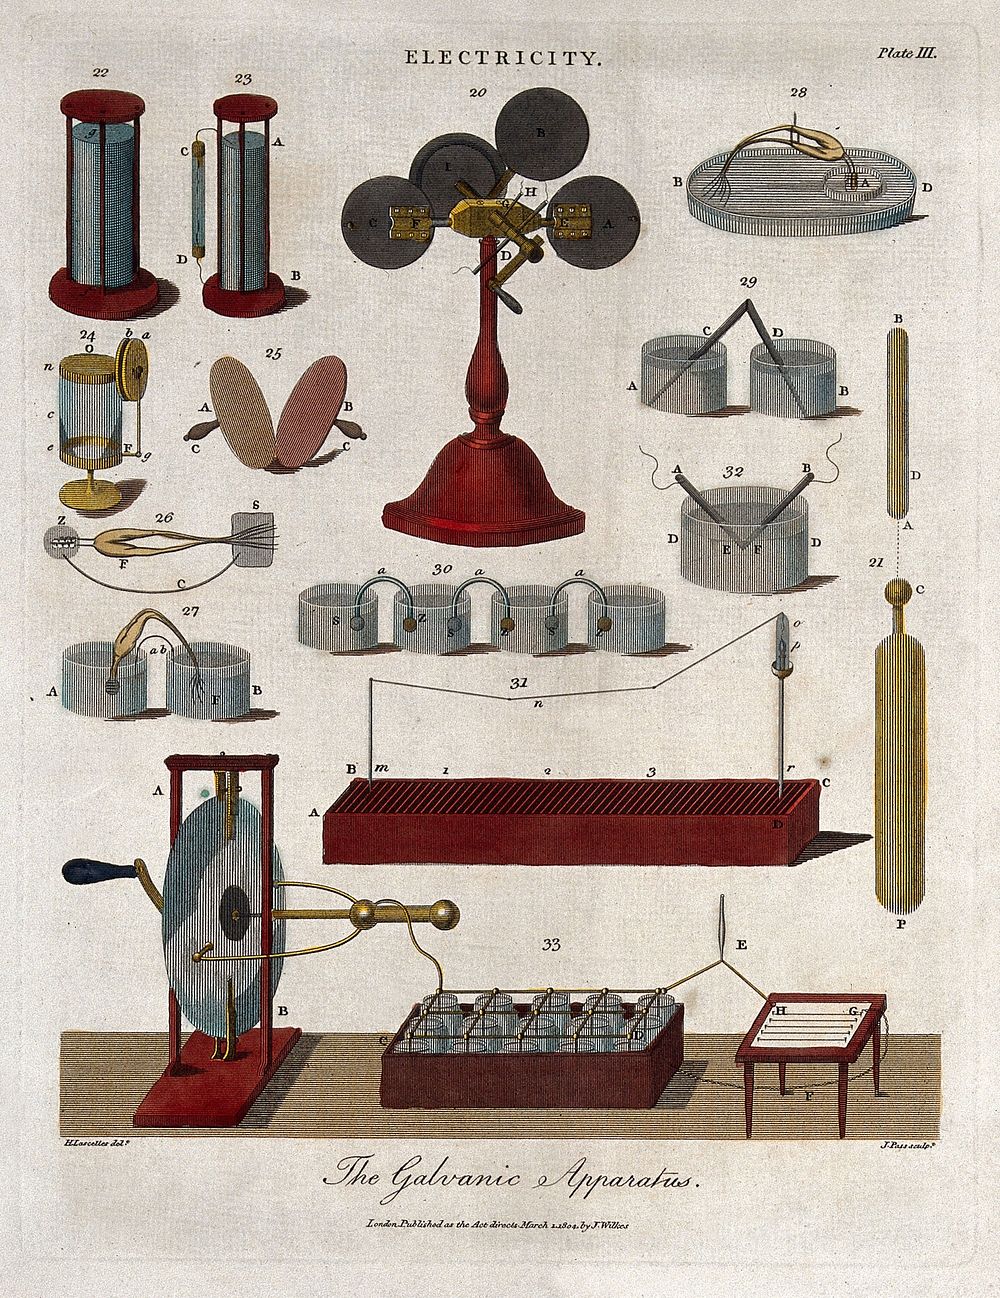 Electricity: electrical equipment, batteries, etc. Coloured engraving, 1804, by J. Pass, after H. Lascelles.